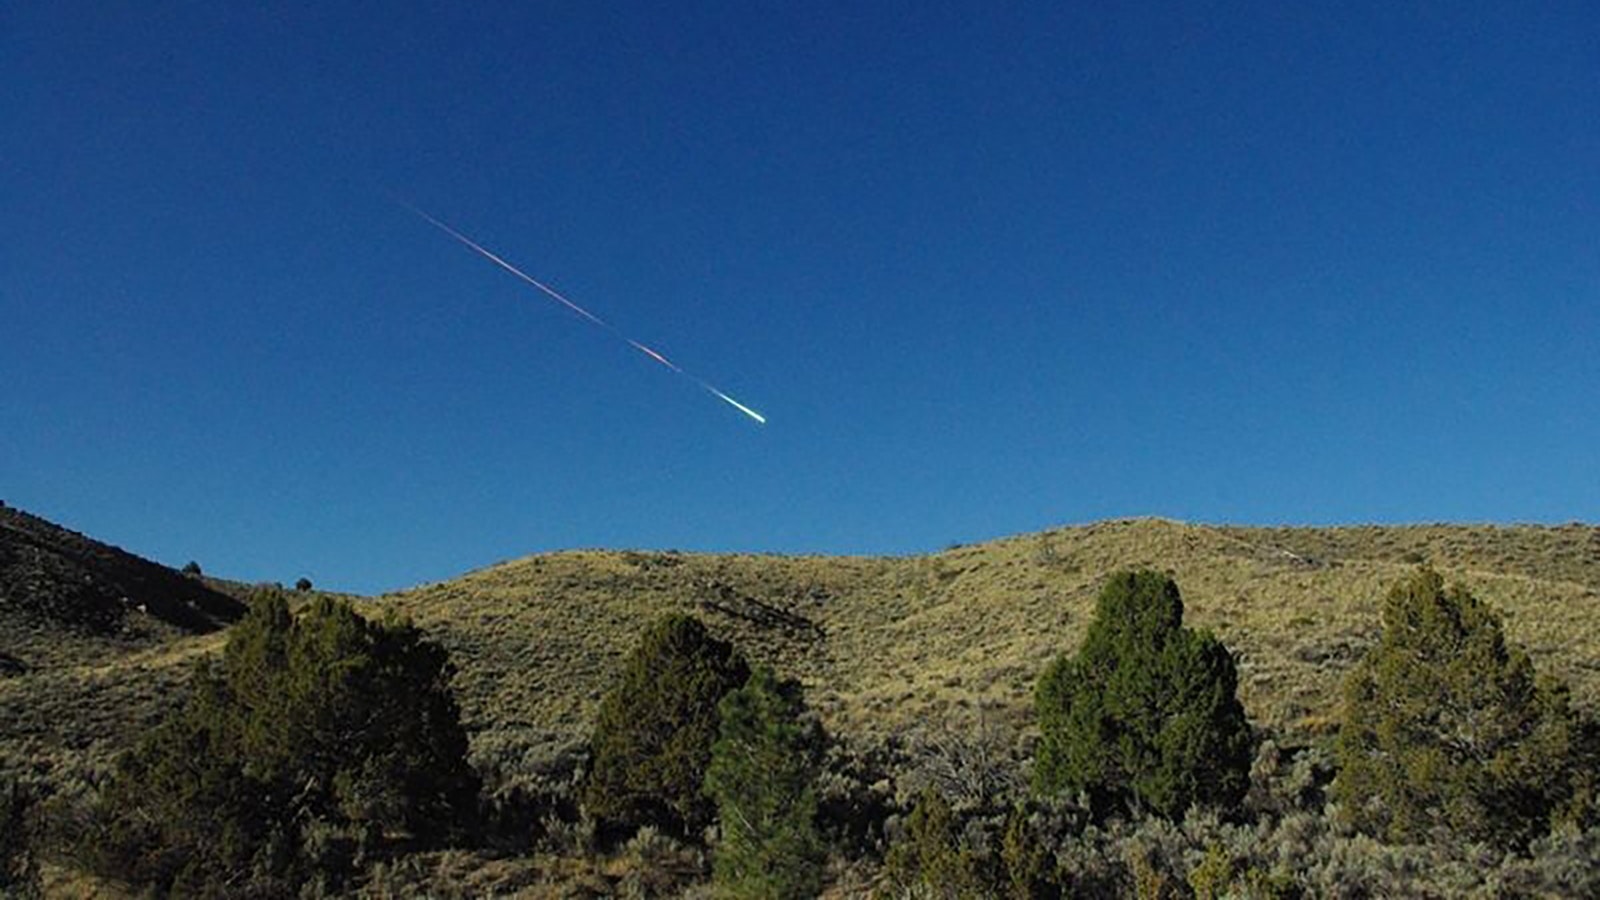 Daytime fireballs are rare, but are spectacular when they can be seen. A similar meteor event was seen over parts of Wyoming, Idaho and Montana on Monday.